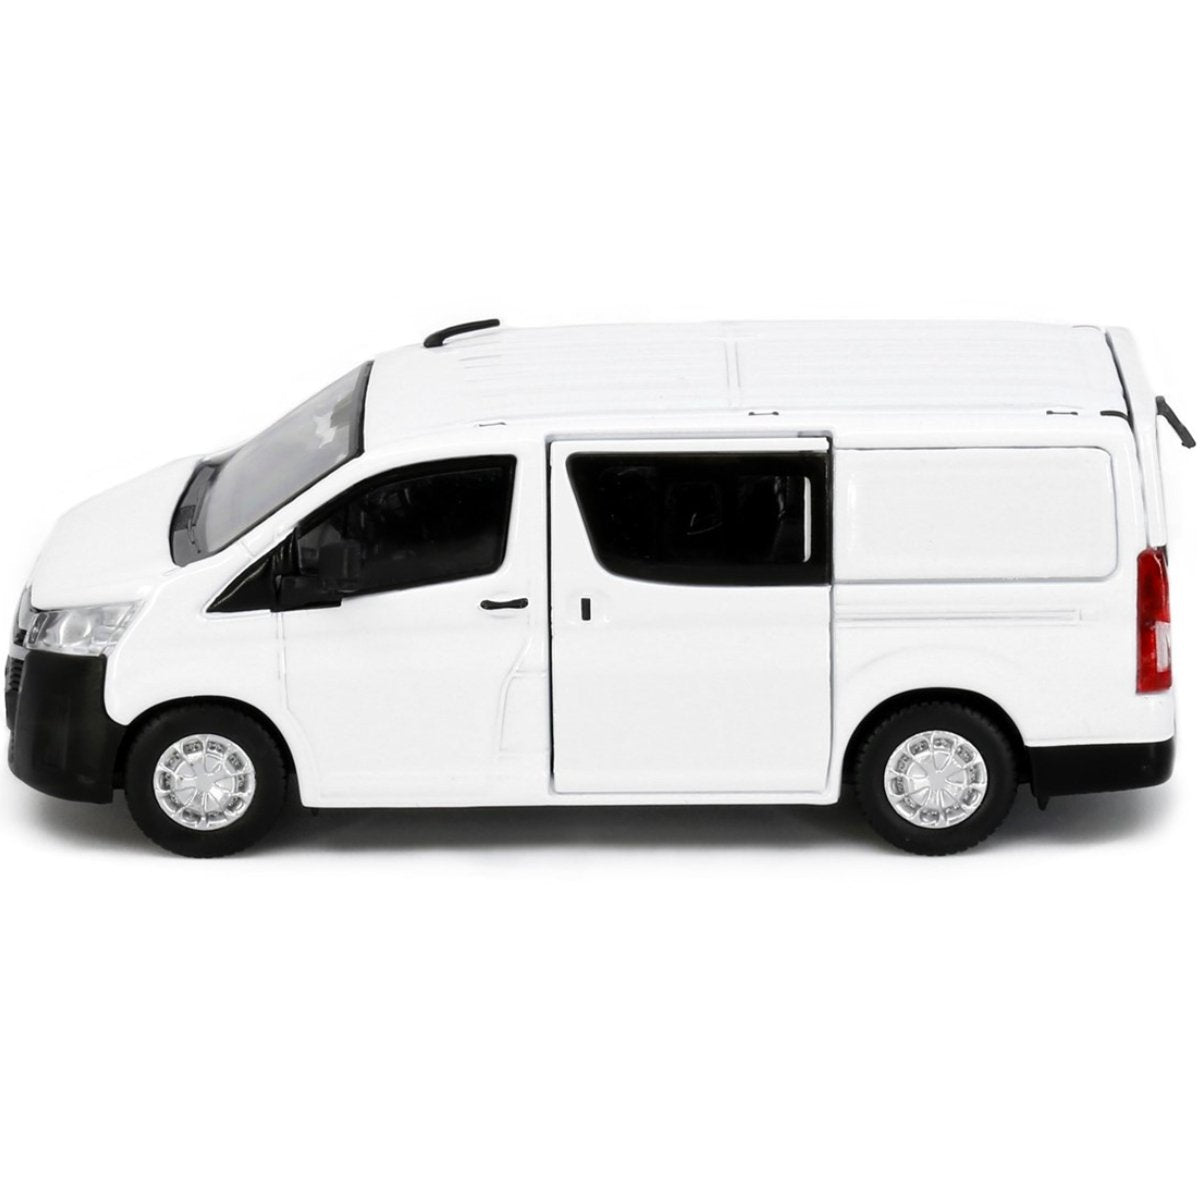 Tiny Models Toyota Hiace H300 White (1:64 Scale) - Phillips Hobbies